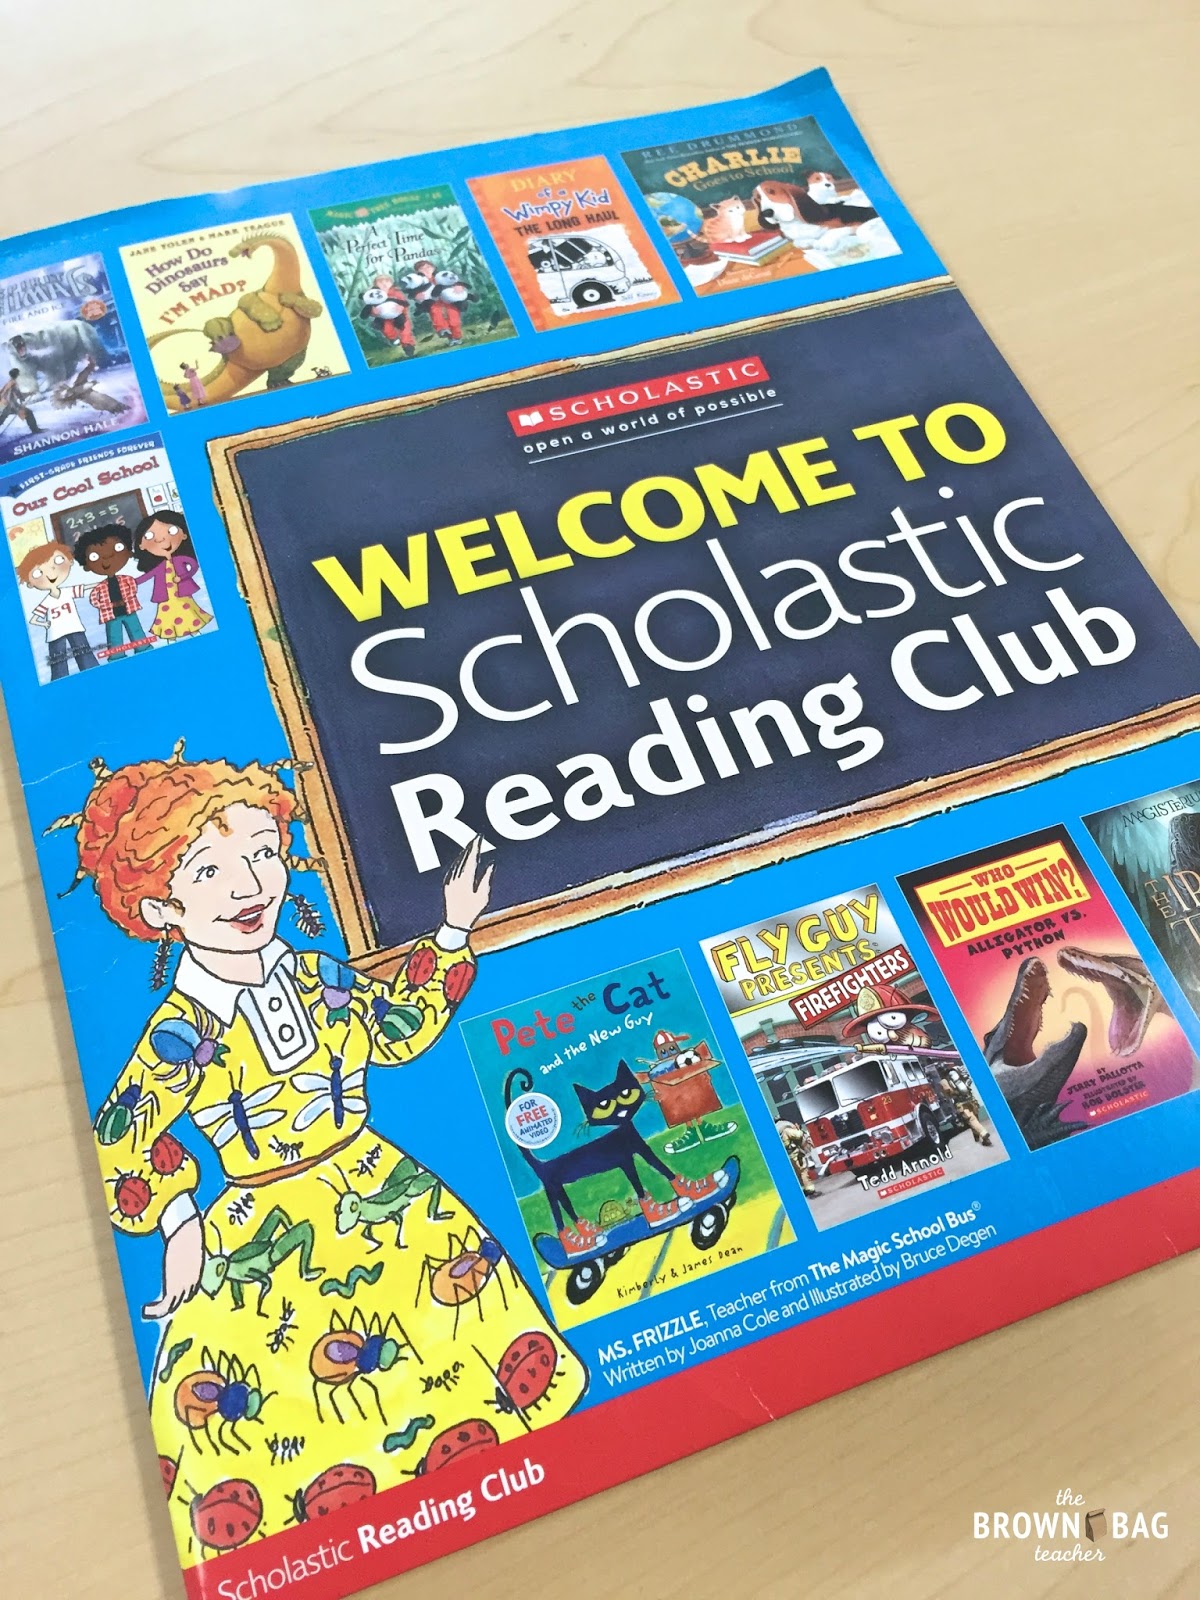 How to find $1 books from Scholastic Book Club 